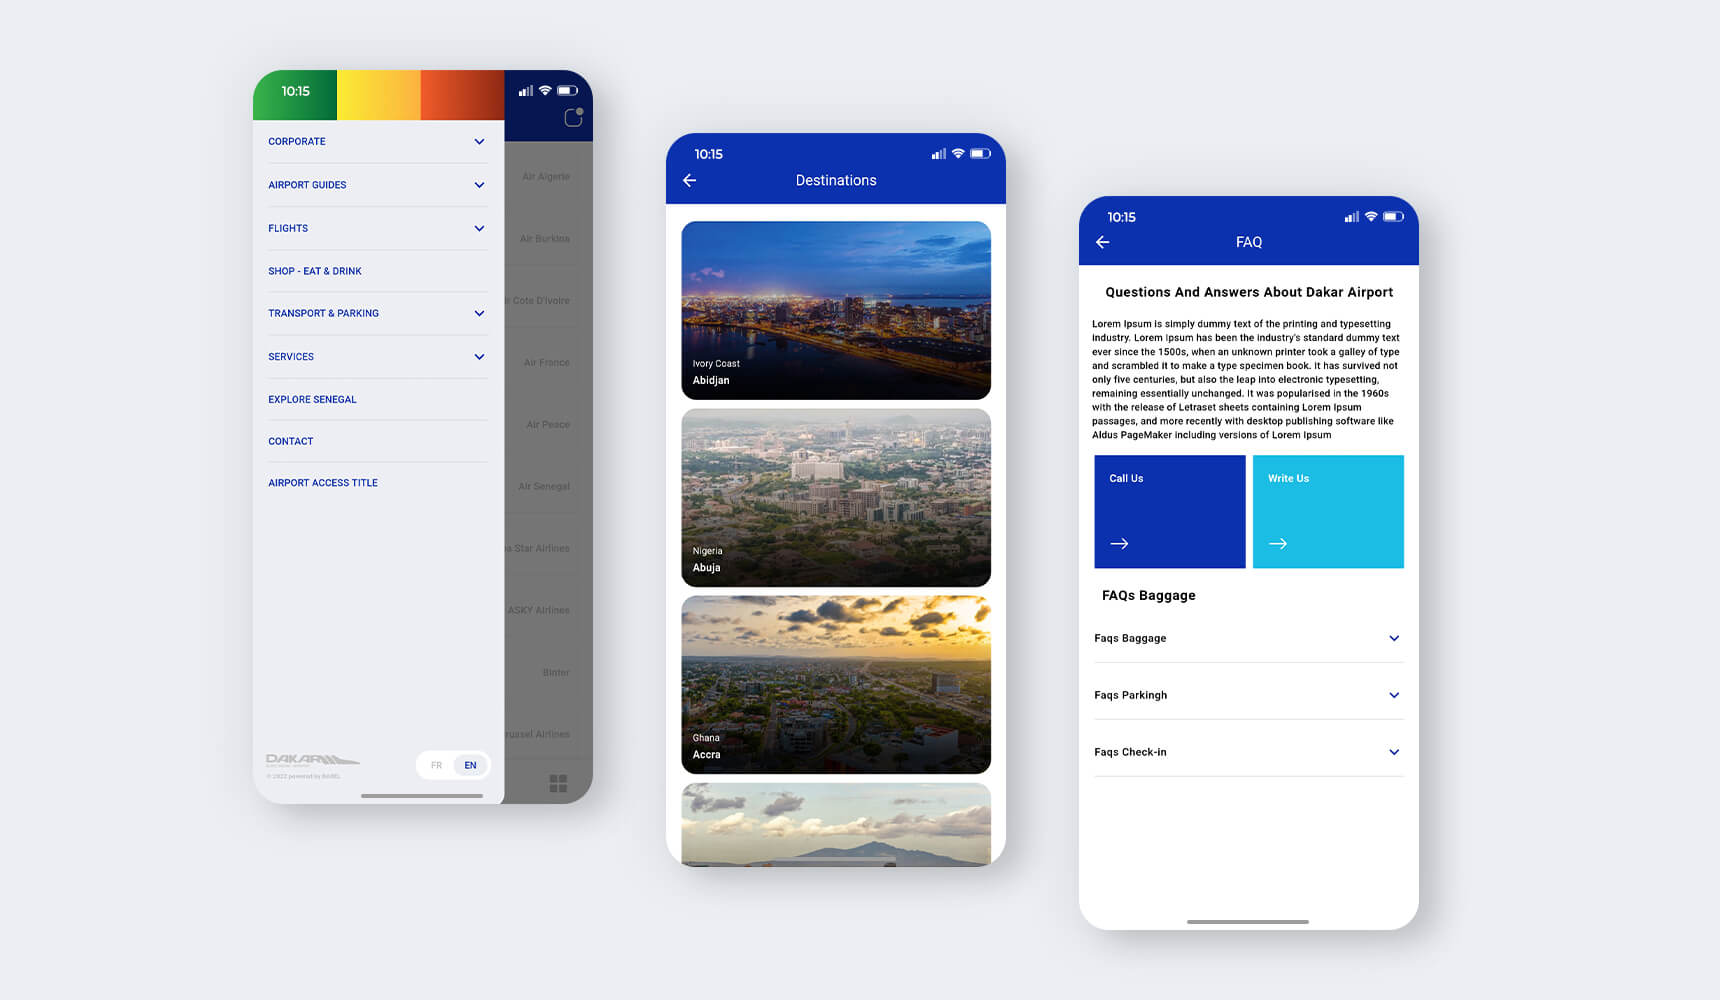 Dakar Aeroport-2 - wrinting 1-3 - web promo-5 - website-page-6 - app-mockup-7- home-page-8 - type-9 - color-10 - web-pages-11 - laptop-mockup-12 - mobil-page-13 - tablet-screen-14 - phone-tablet mockup-15 - web-pages-16 - imac-mockup-17 - web-pages-1-18 - writing app-19 - app-cover-20 - phone-mockup-21 - phone-screen-mockup-22 - phone-screen-1-23 - phone-screen-2-24 - phone-screen-3